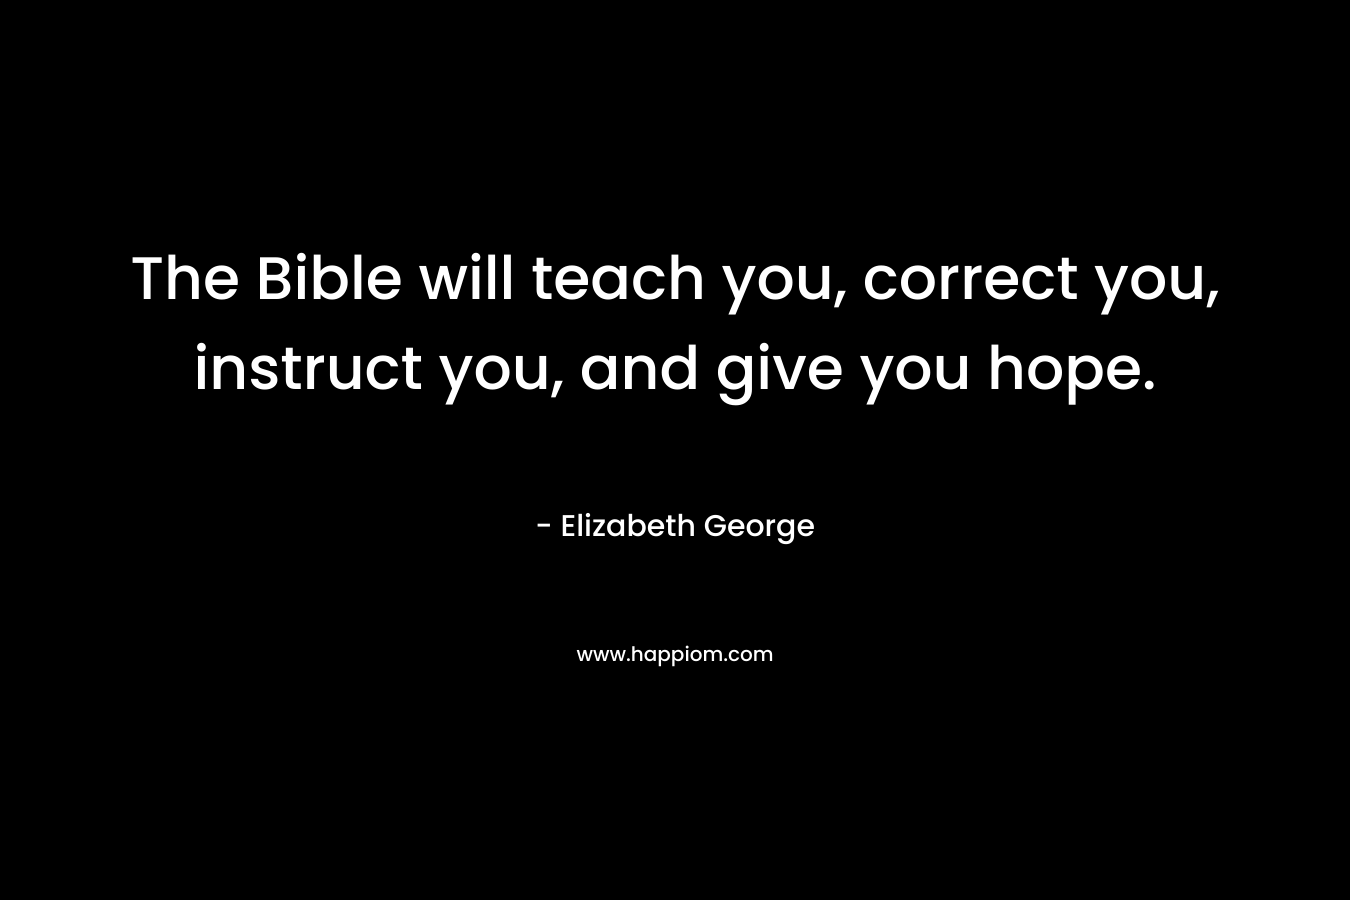 The Bible will teach you, correct you, instruct you, and give you hope.